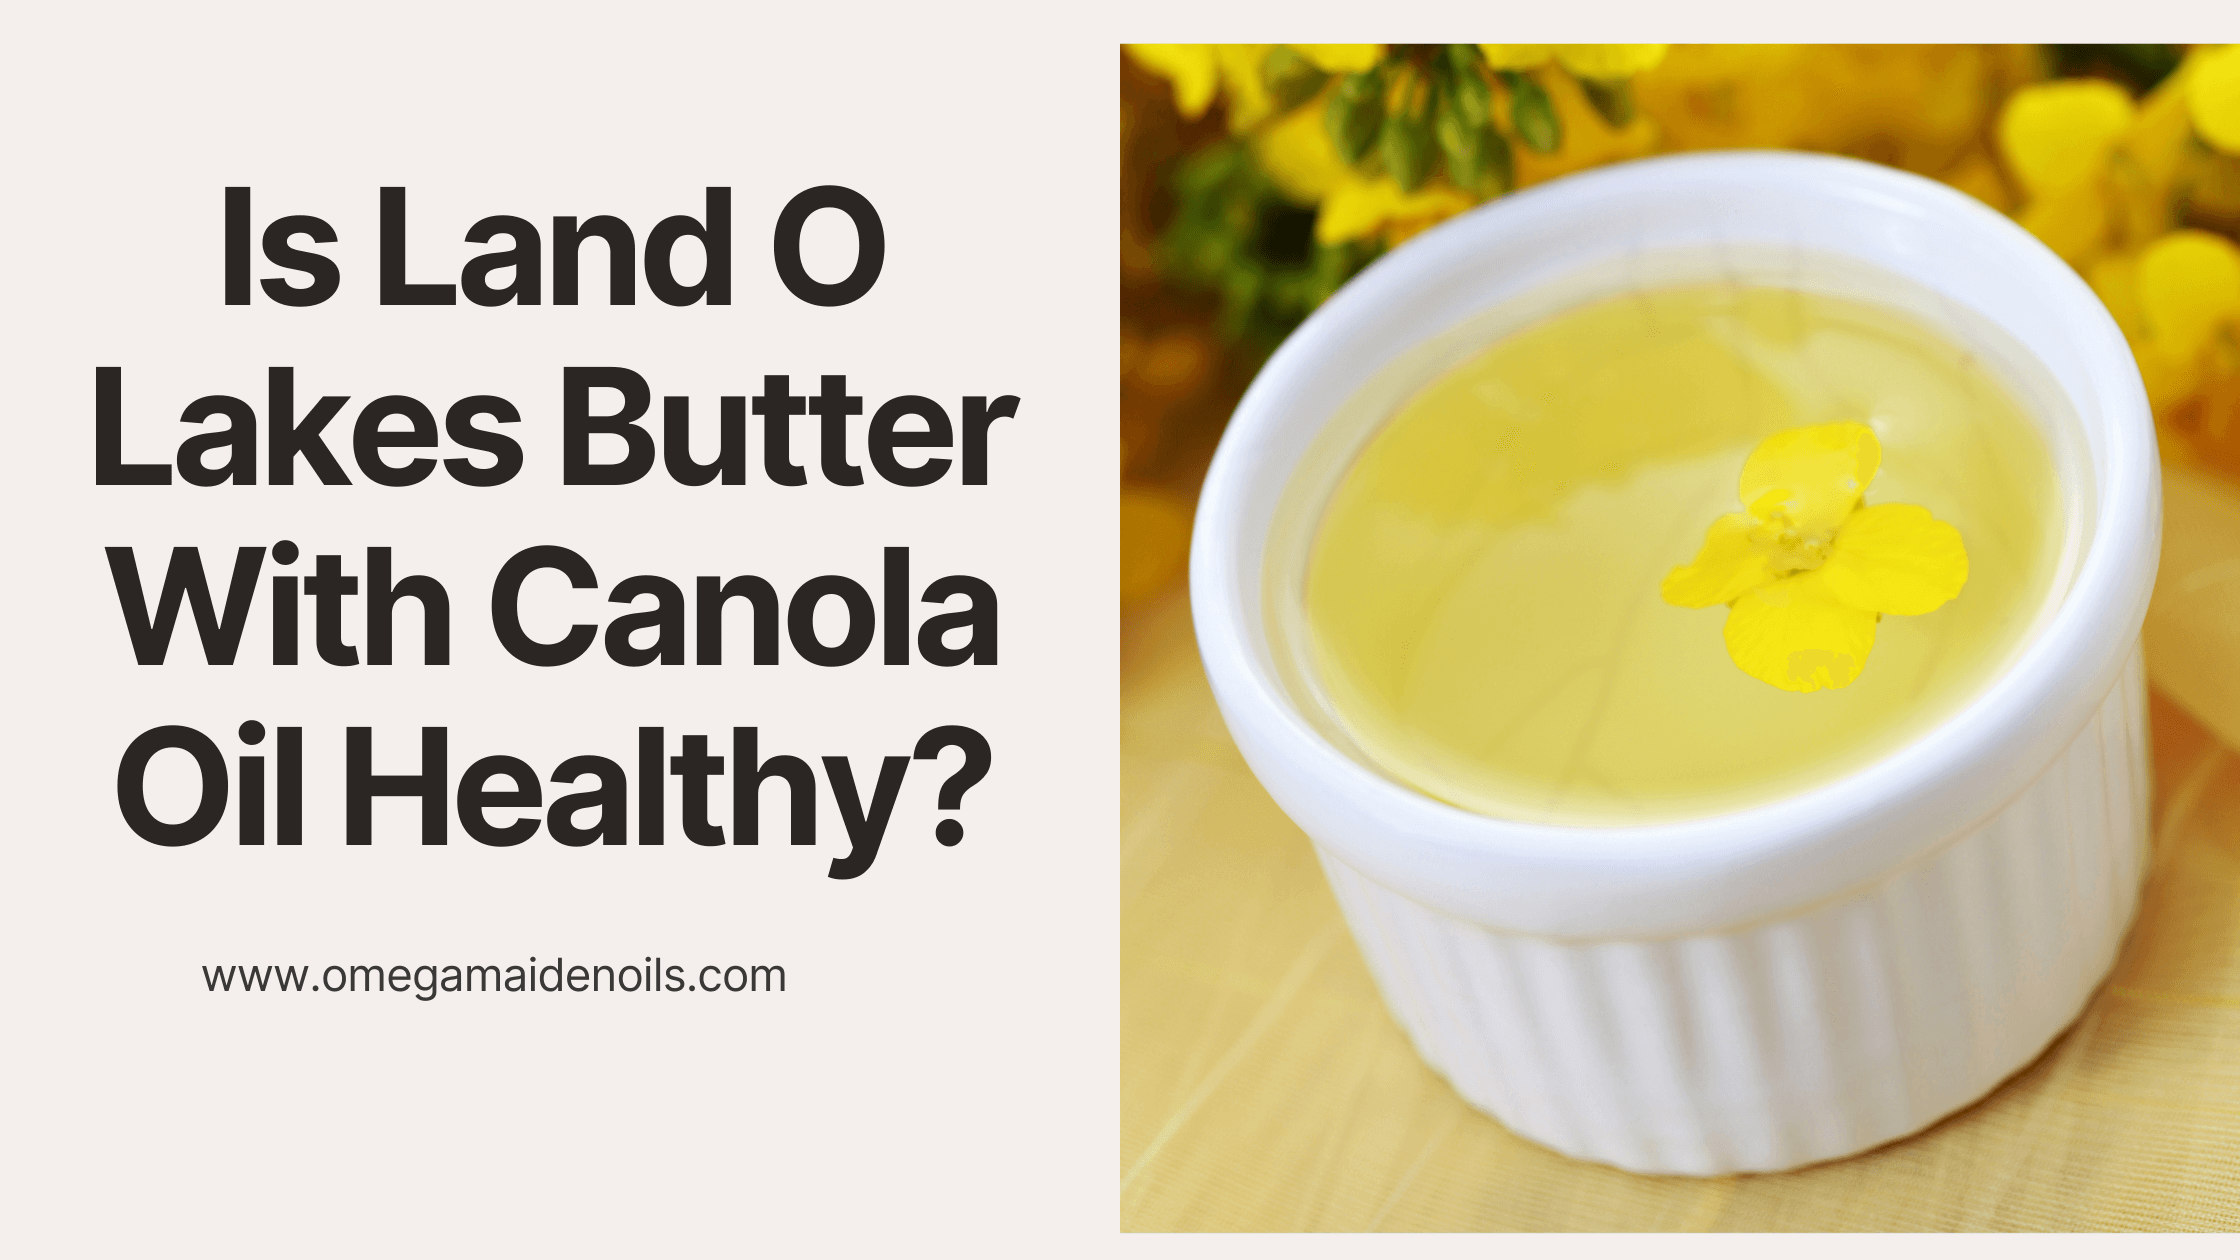 Is Land O Lakes Butter With Canola Oil Healthy